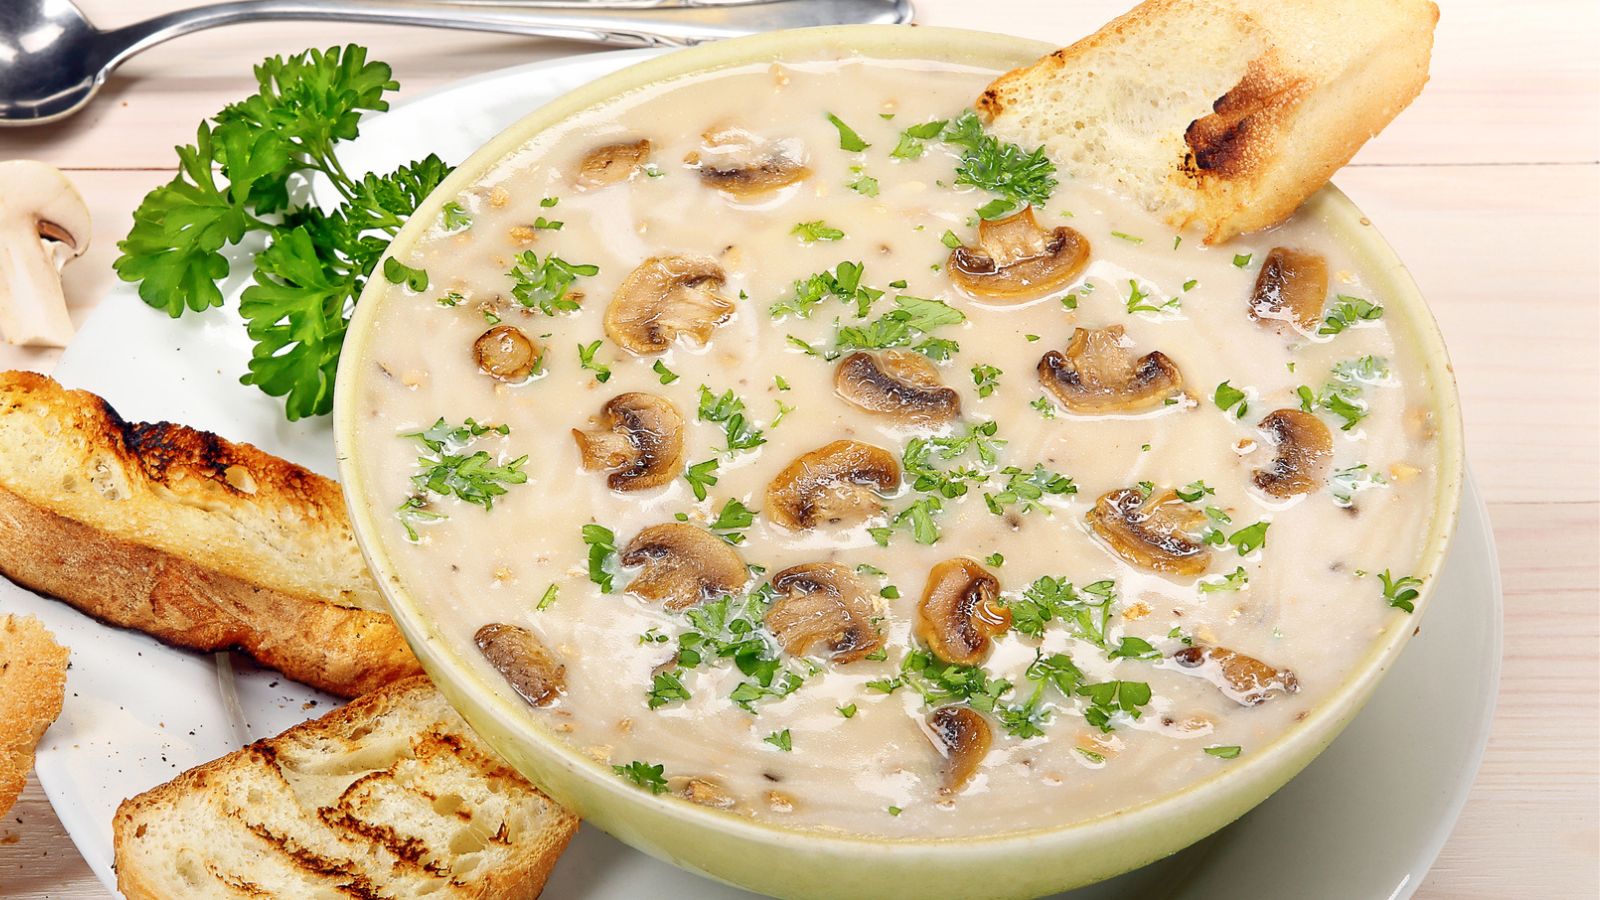 Mushroom Lovers Rejoice with These 20 Scrumptious Dishes